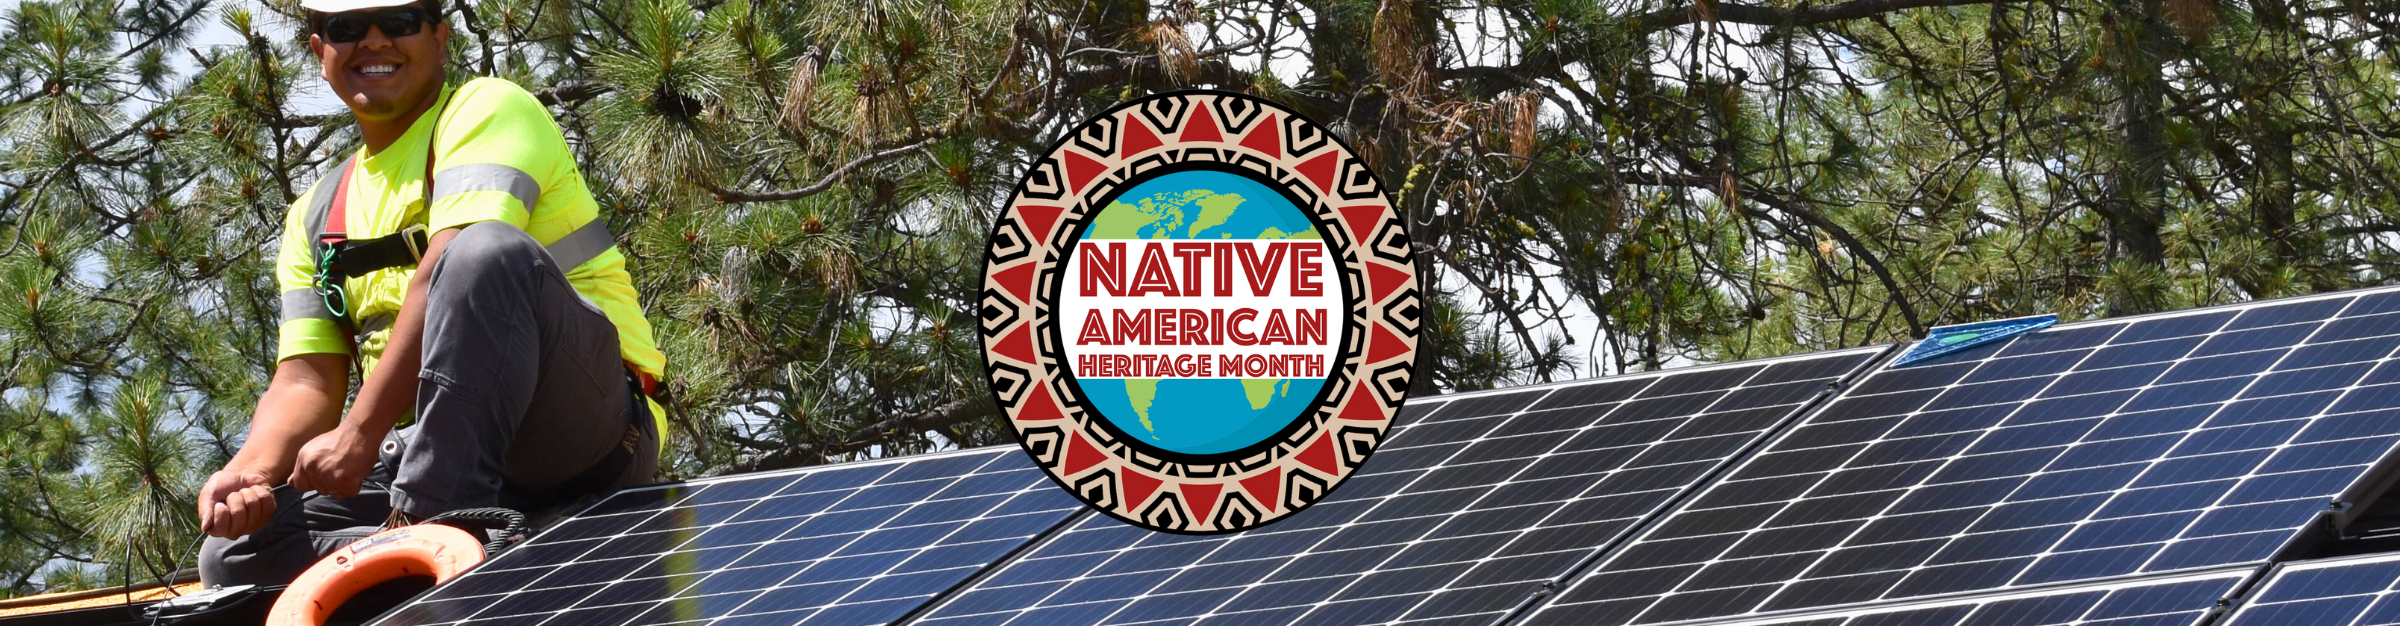 Native American Heritage Month 2